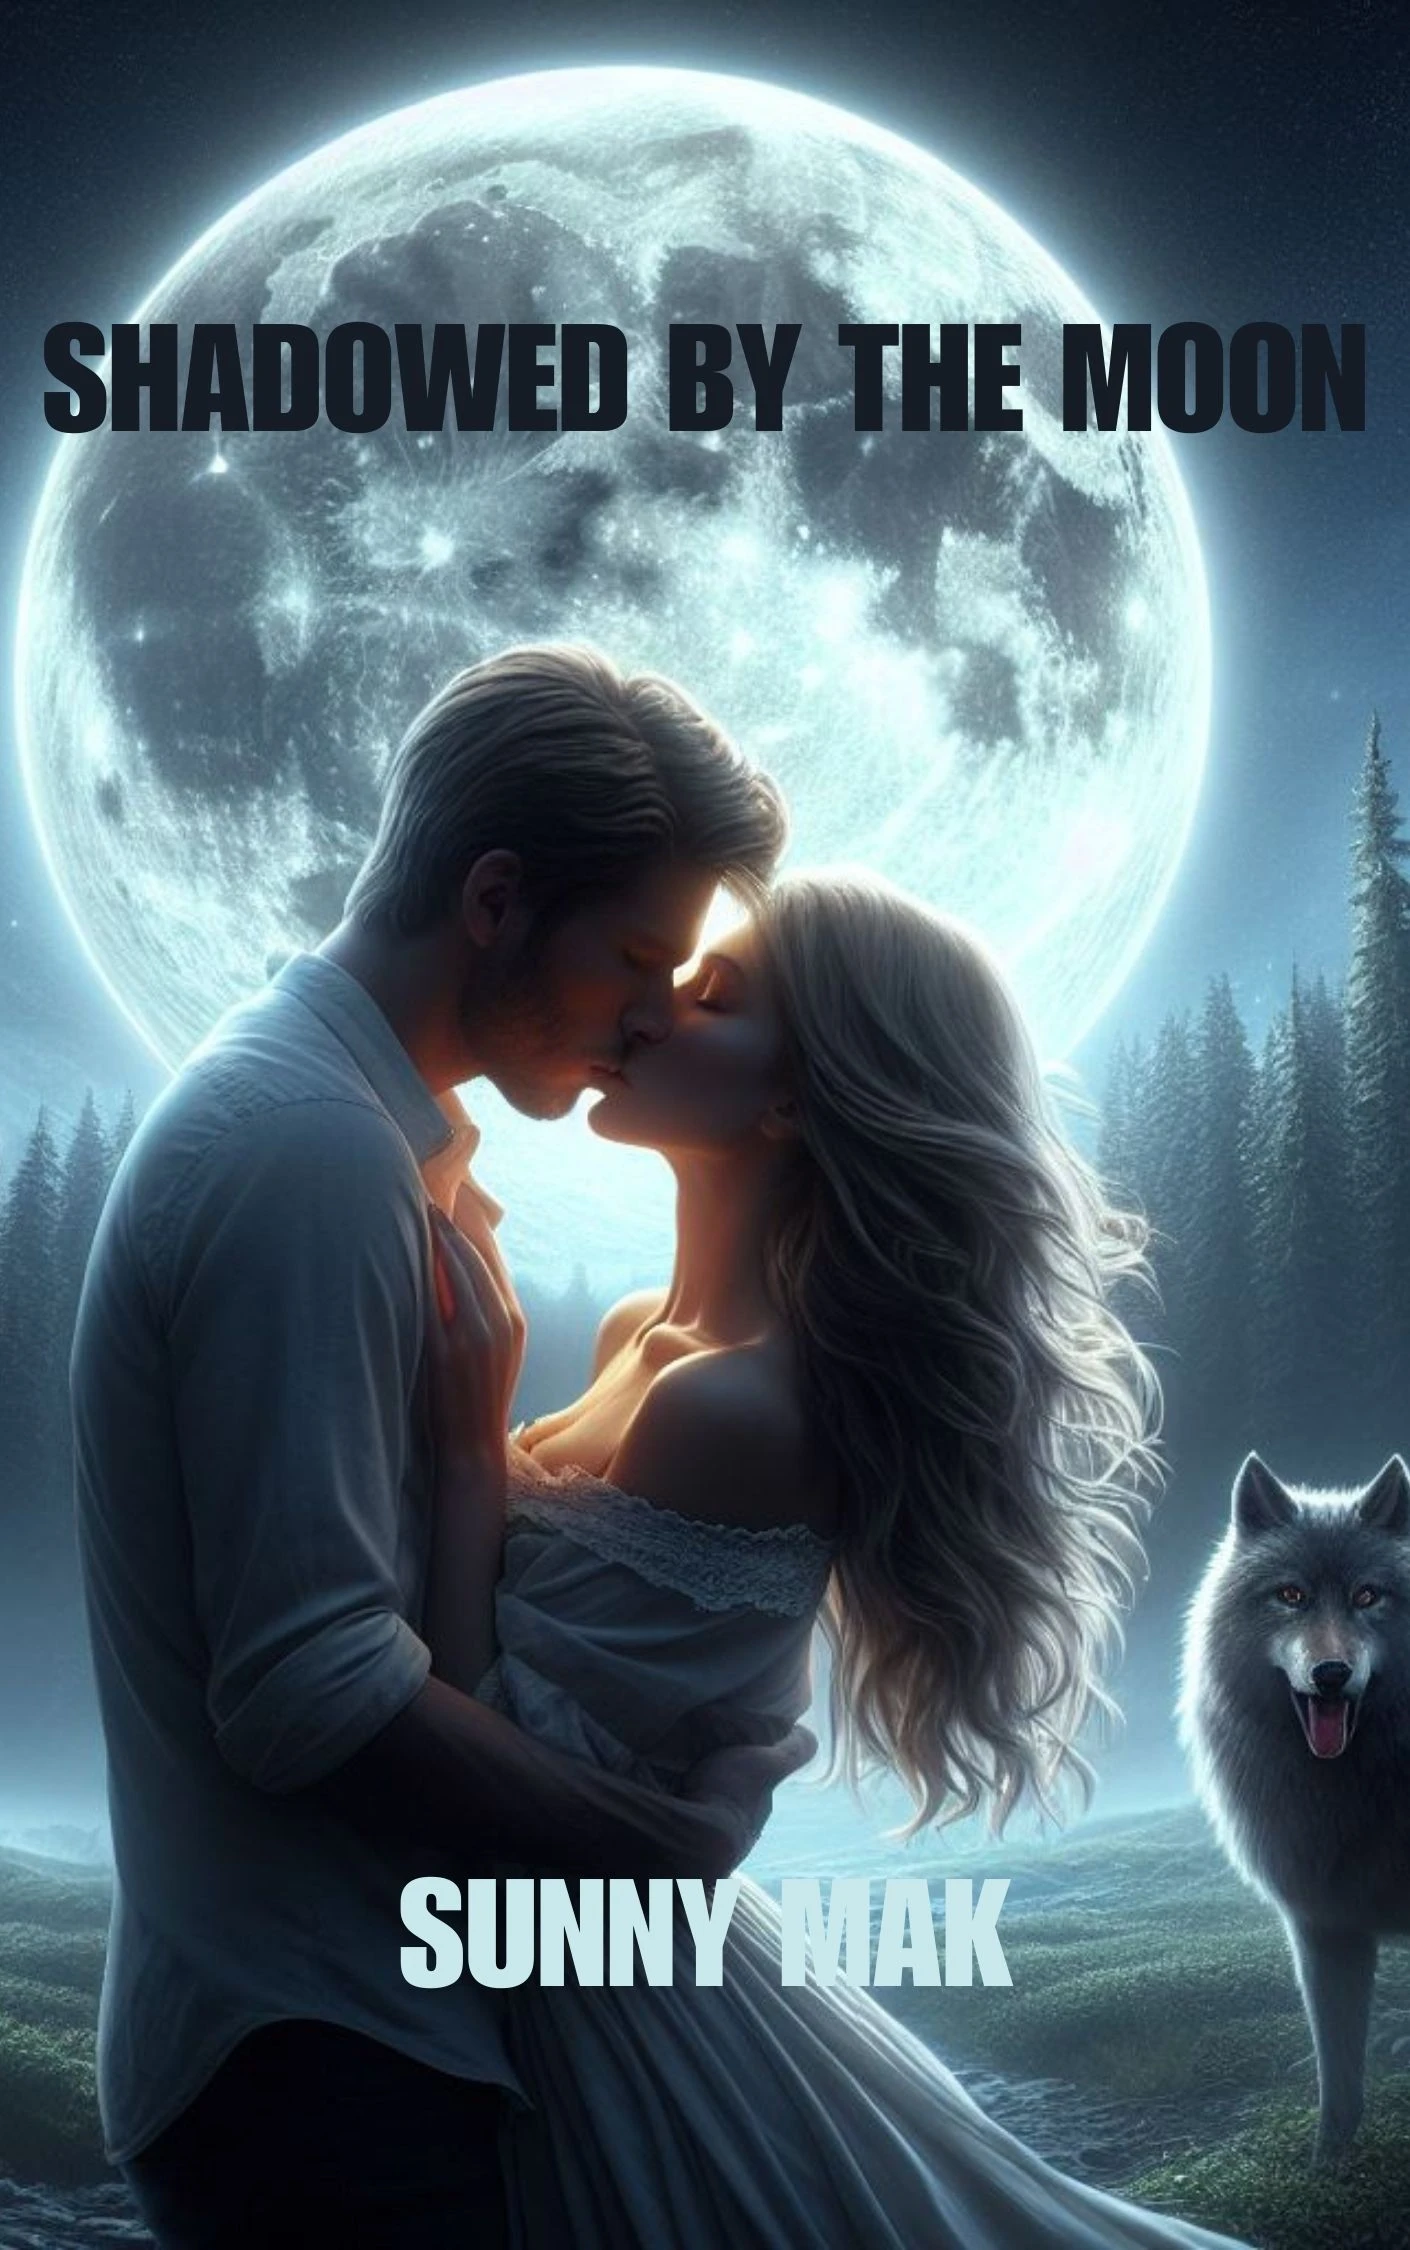 Shadowed by the Moon: A Long Steamy Werewolf Romance Graphic Novel